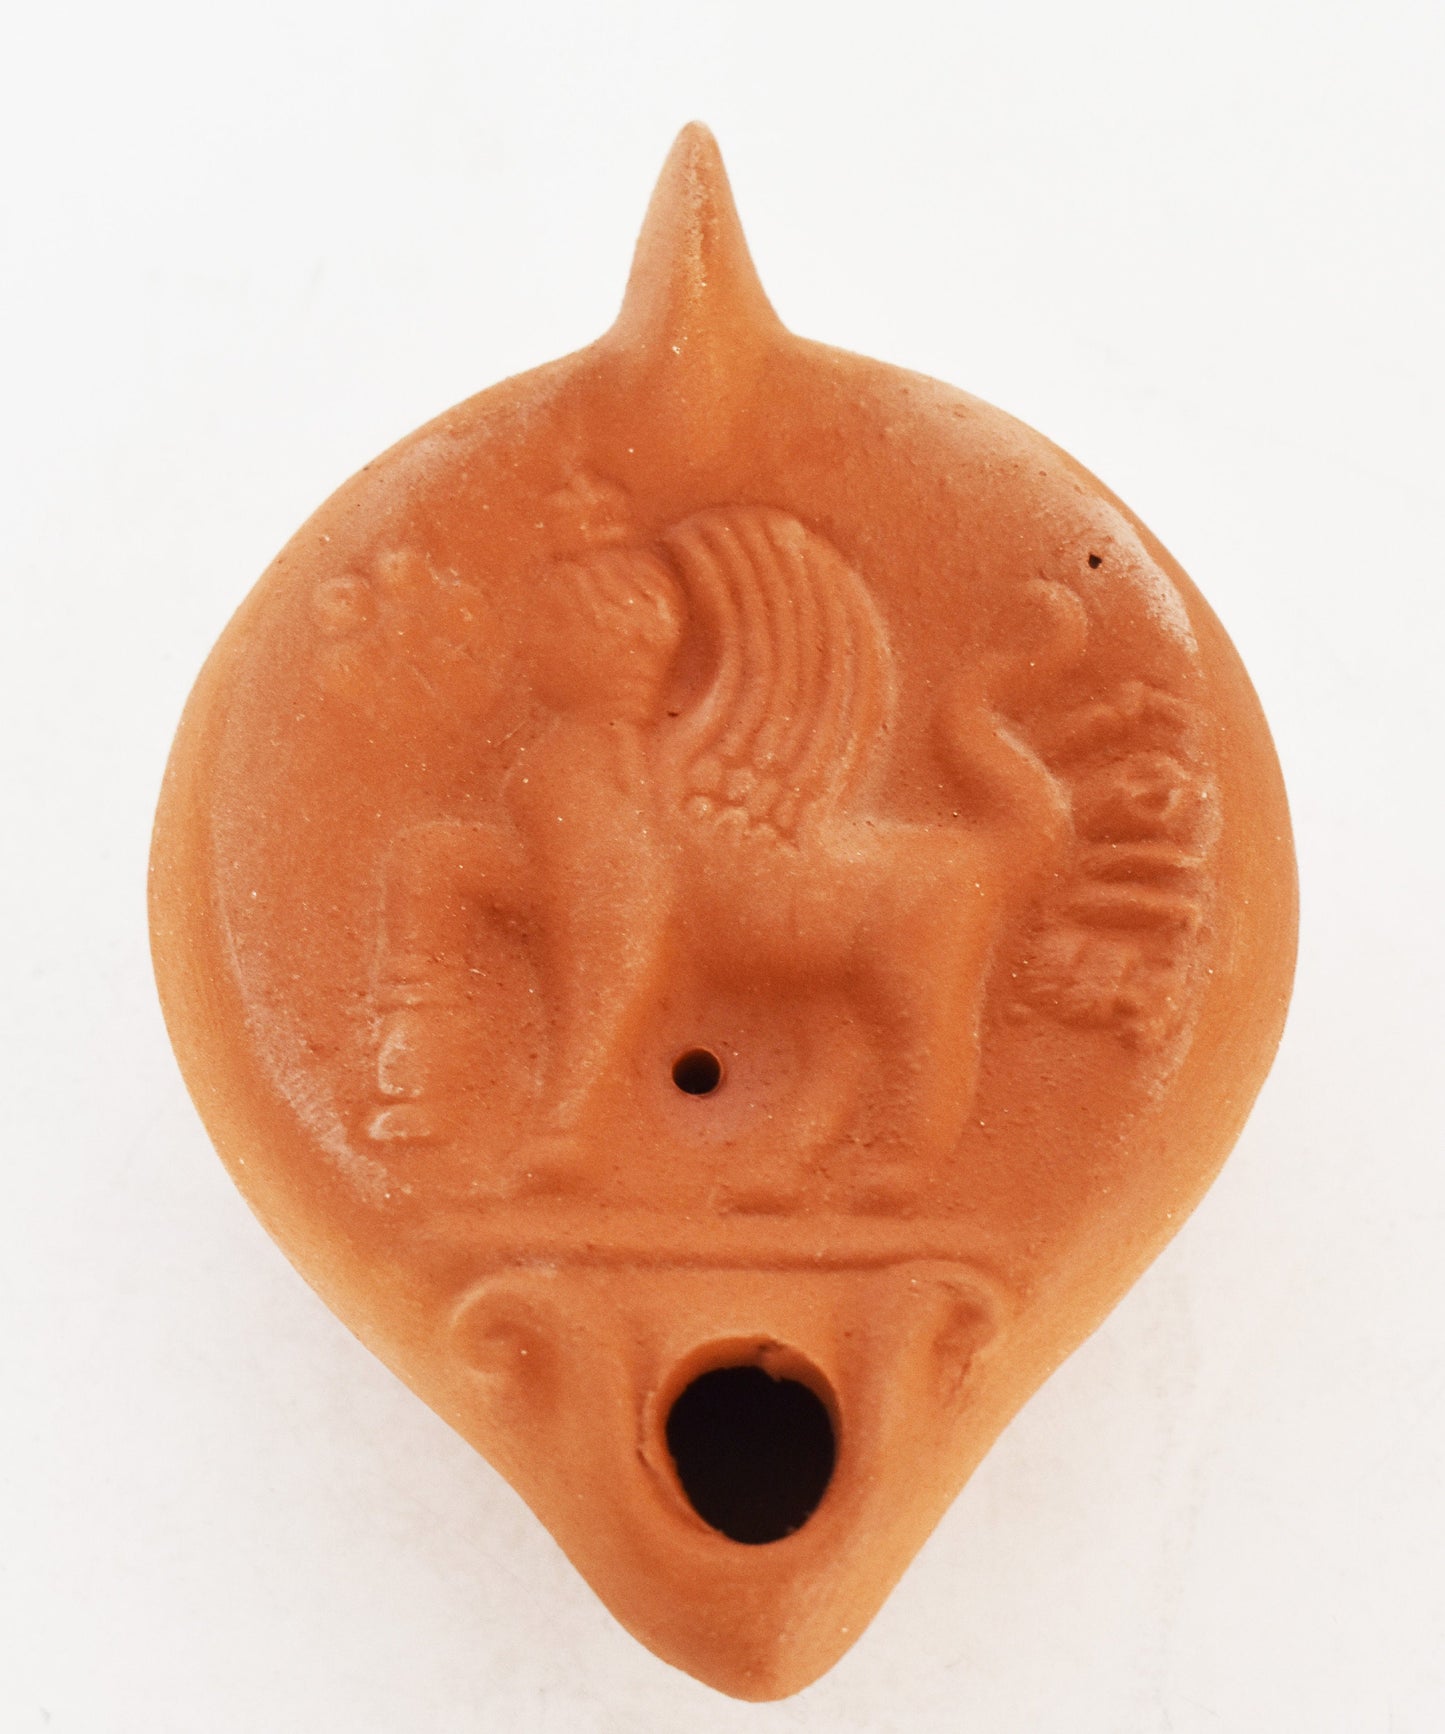 Oil Lamp - Athens, Attica - 600 BC - Sphinx - Guardian of Sacred Places - Symbol of Mystery - Museum Reproduction - Ceramic Artifact